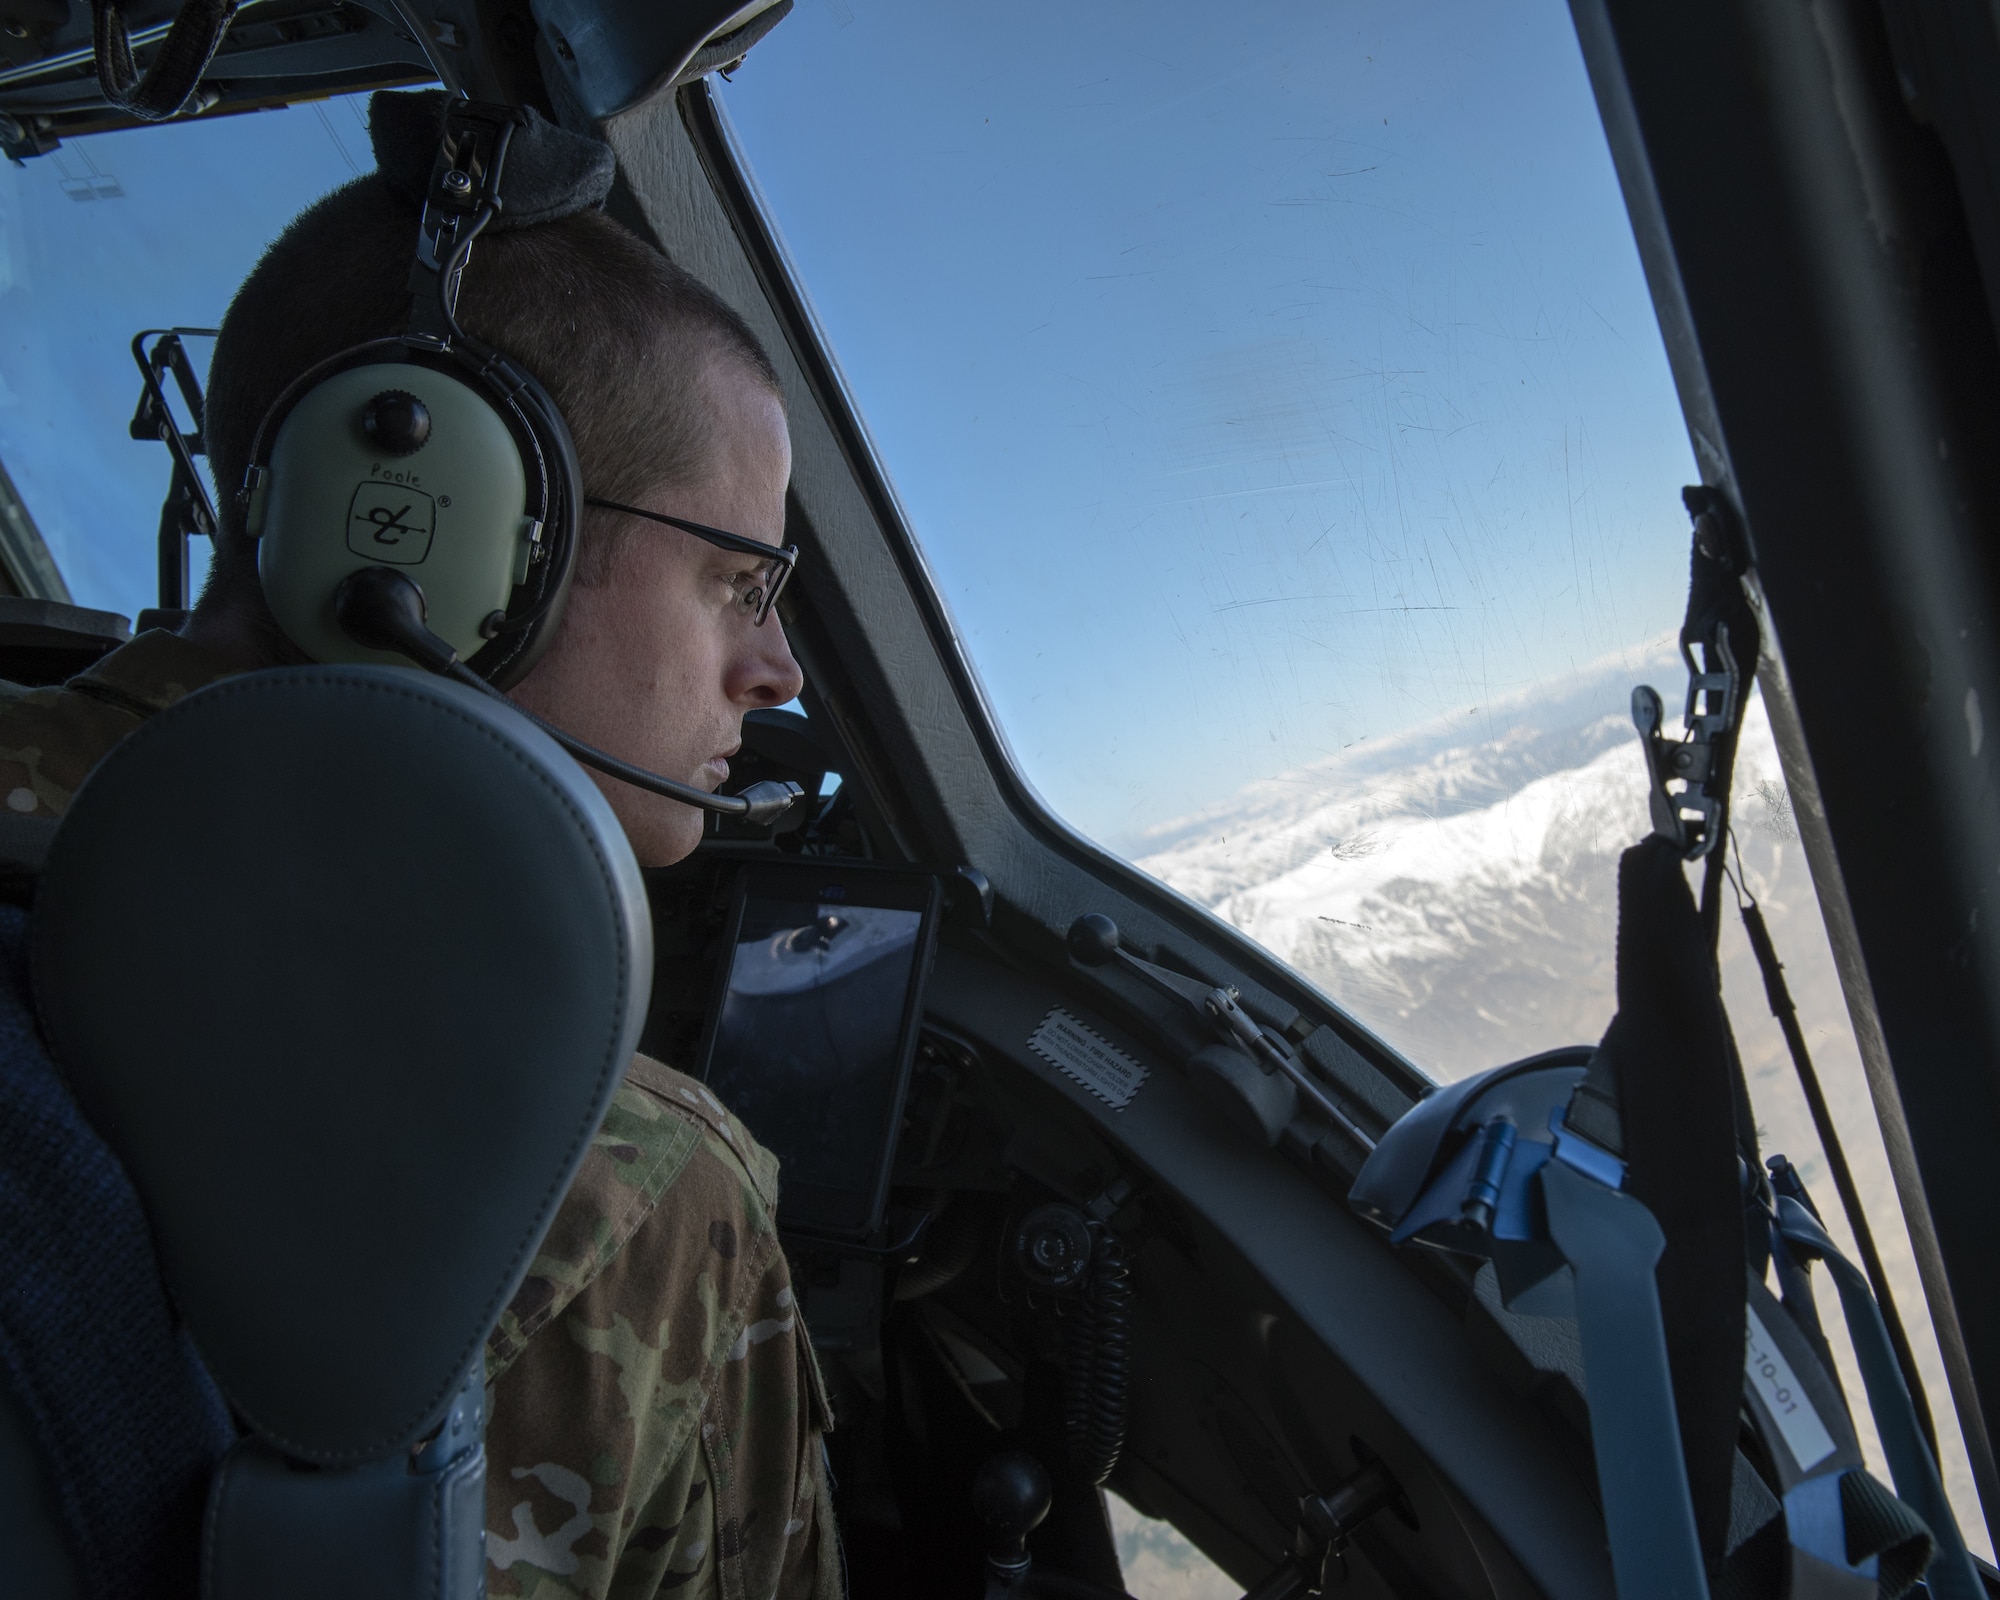 U.S. Air Force Capt. Justin Poole, 21st Airlift Squadron pilot, scans the landscape outside Bagram Airfield, Afghanistan in a C-17 Globemaster III, May 26, 2019. The C-17 is capable of rapid strategic delivery of troops and cargo anywhere in the world. (U.S. Air Force photo by Tech. Sgt. Traci Keller)